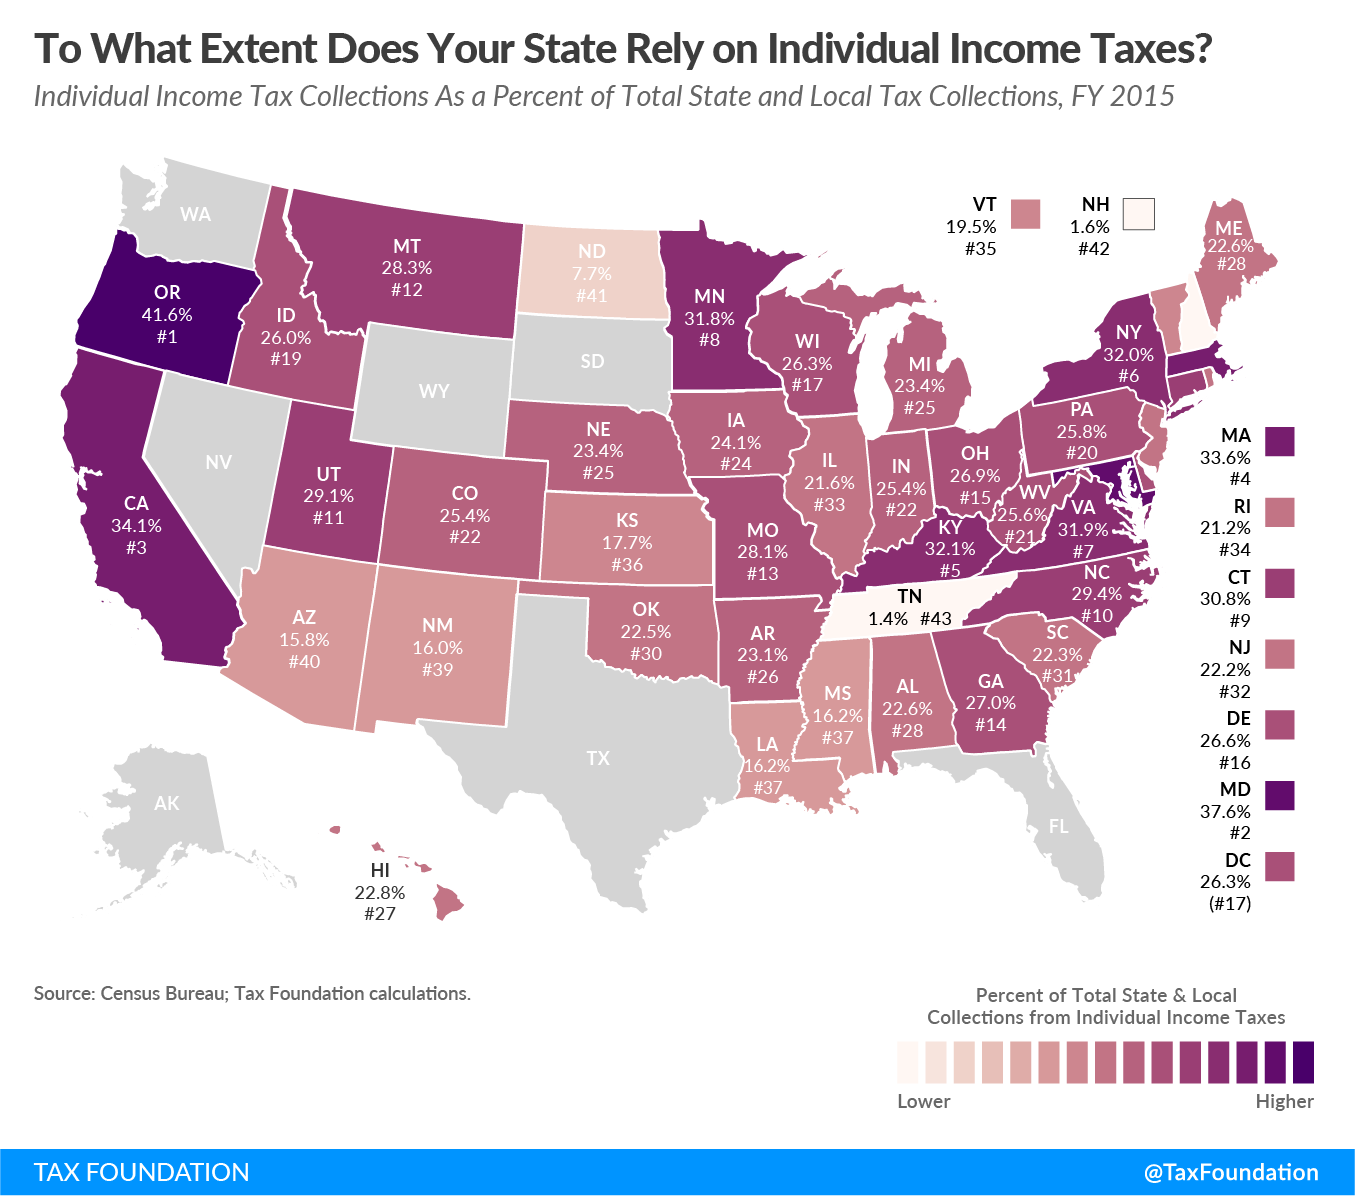 Personal Income Tax Reliance by State, State Rankings